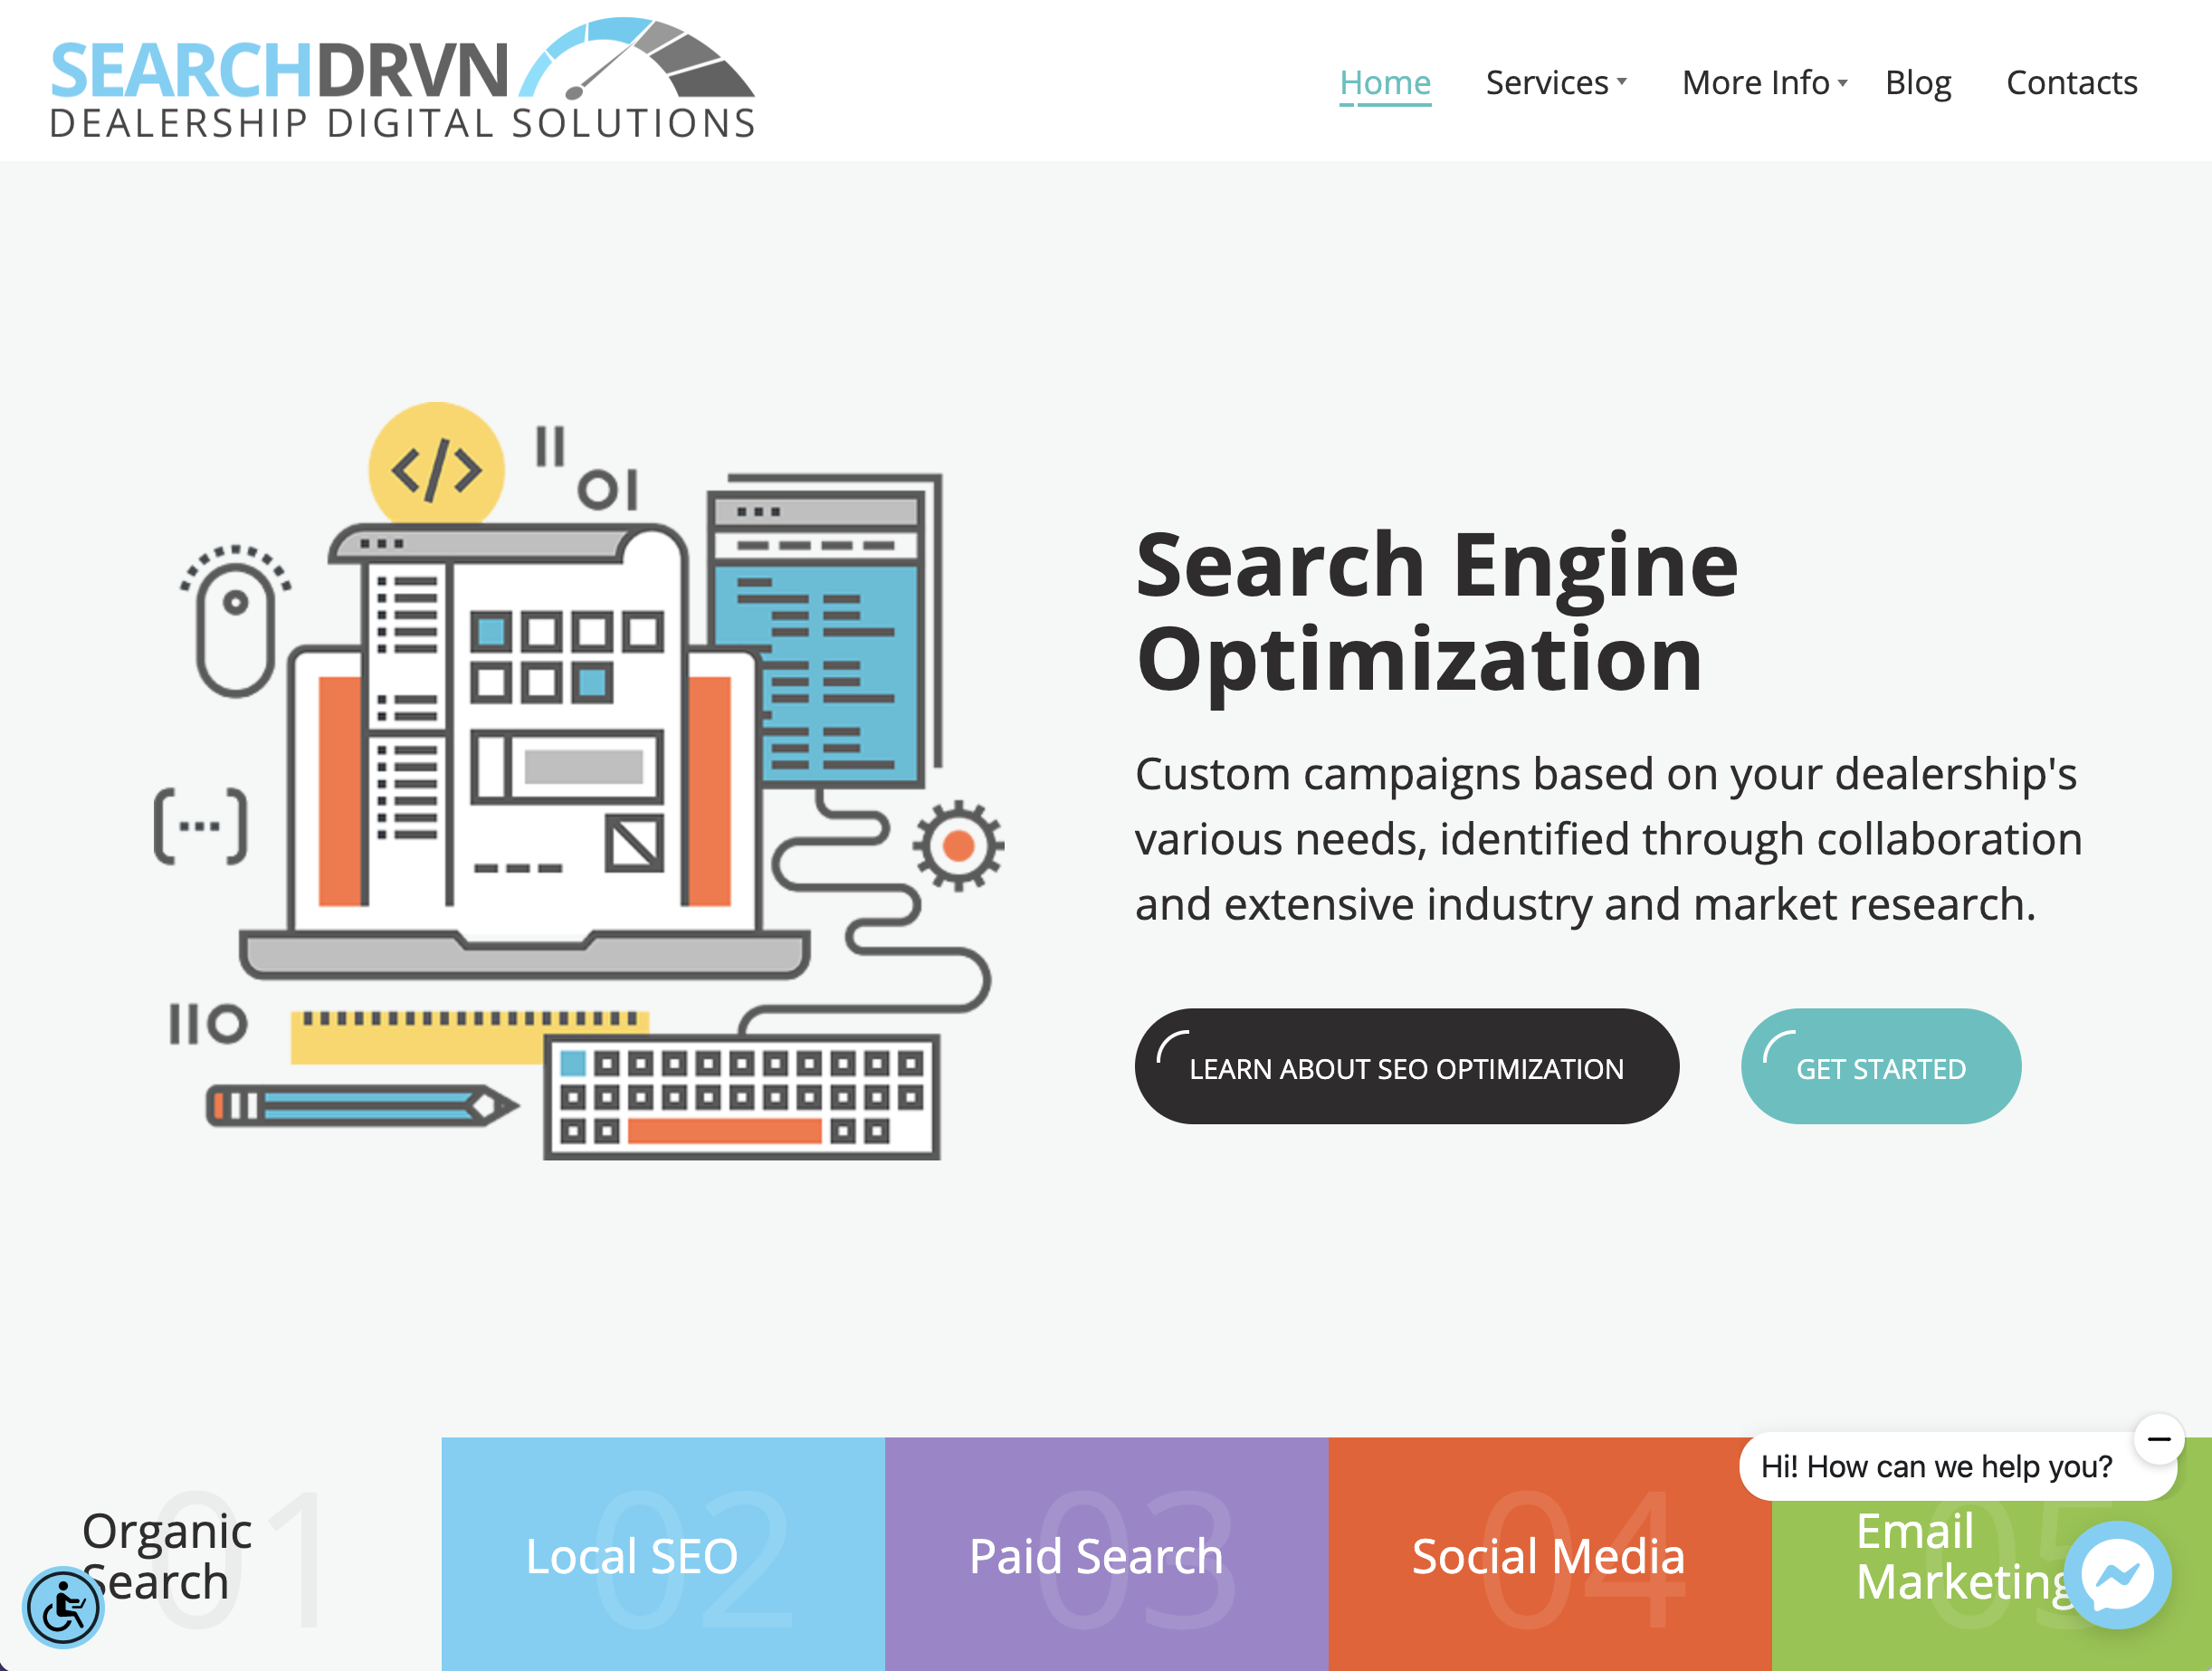 SearchDRVN